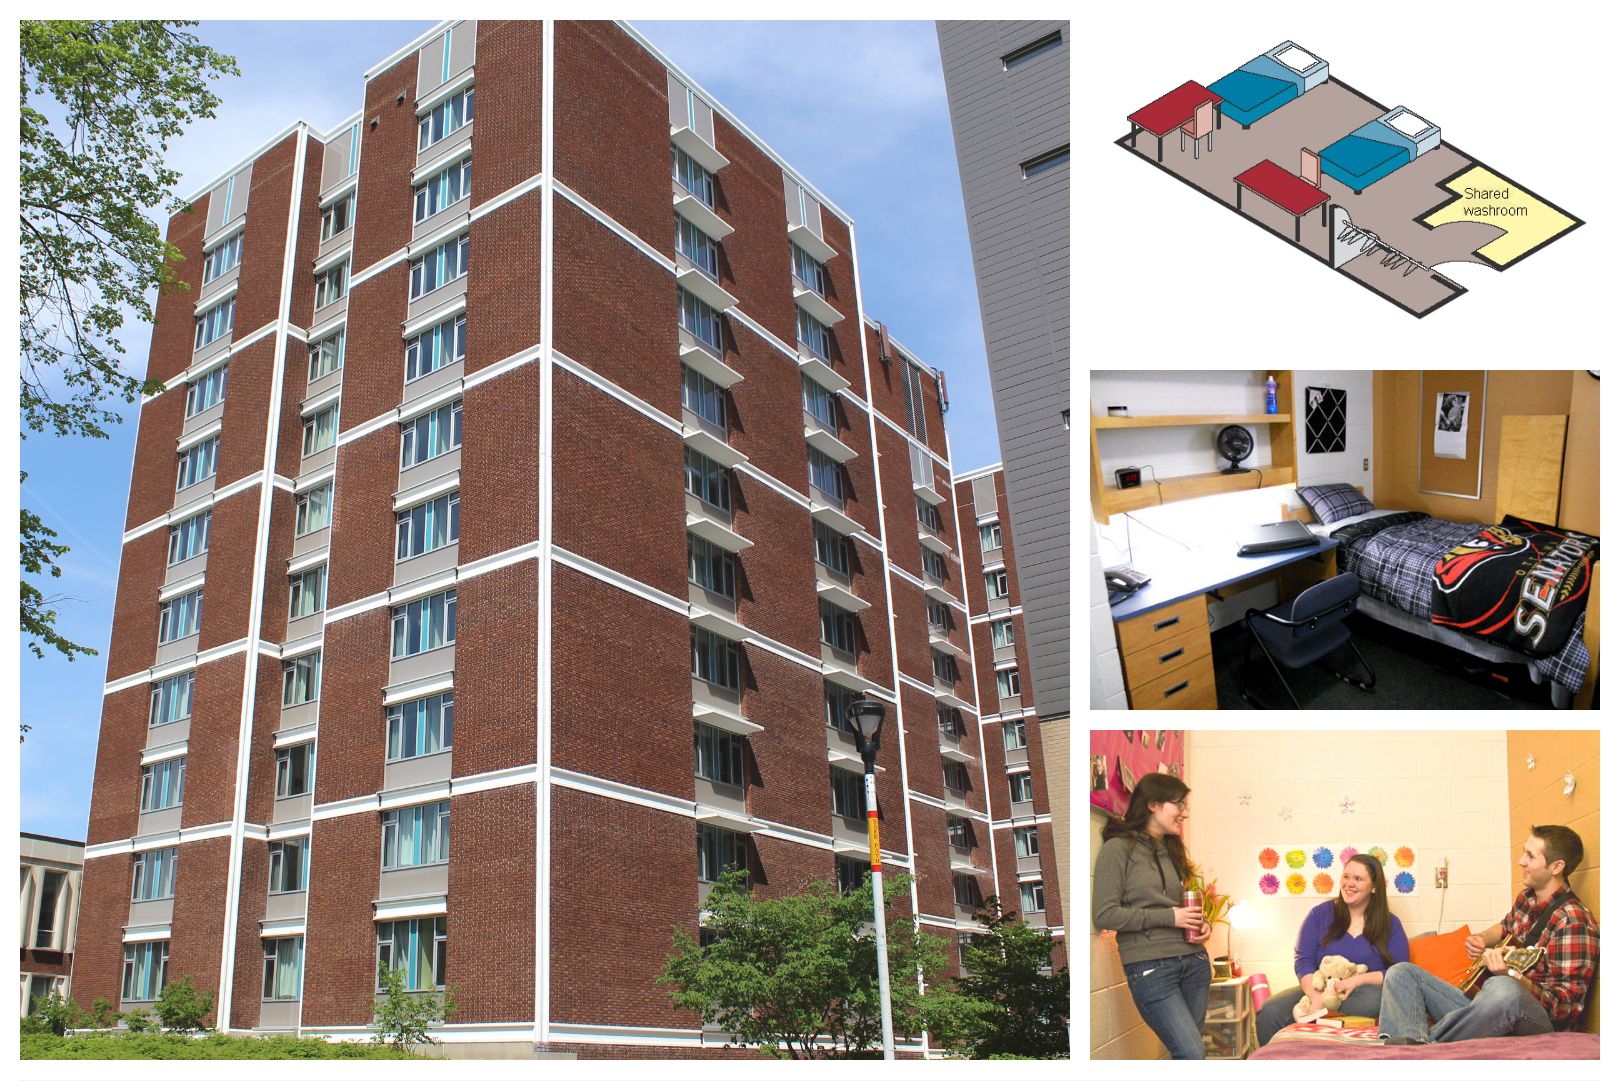 Images of Glengarry House with floor plan and rooms. Building details: Opened in 1969, renovated in 2005, 11 floors, 3 elevators, 614 residents, 3 accessible spaces, mandatory meal plan